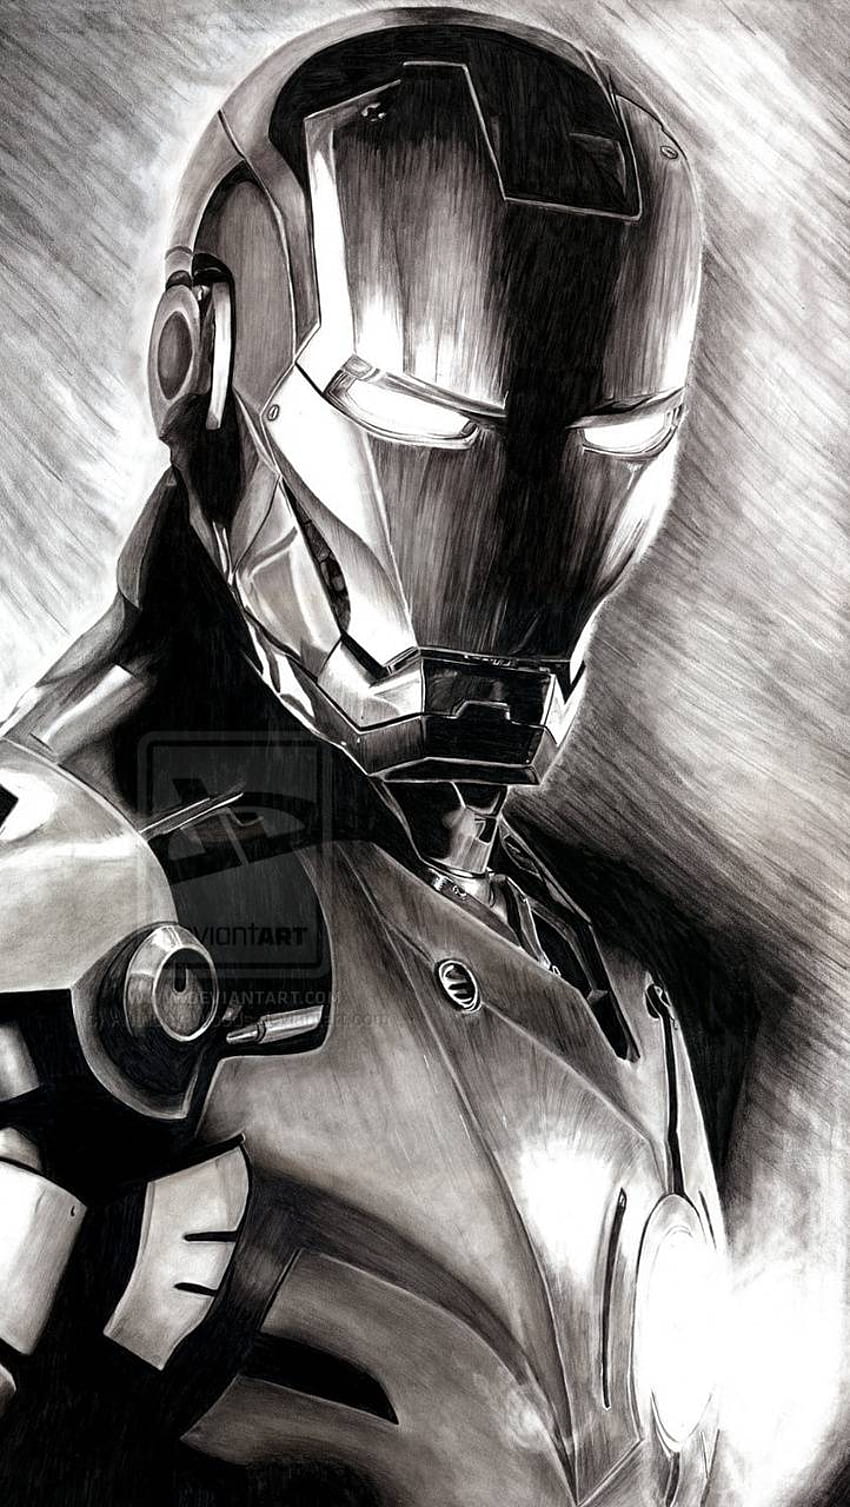 Free Iron man drawing to download and color - Iron Man Kids Coloring Pages-saigonsouth.com.vn